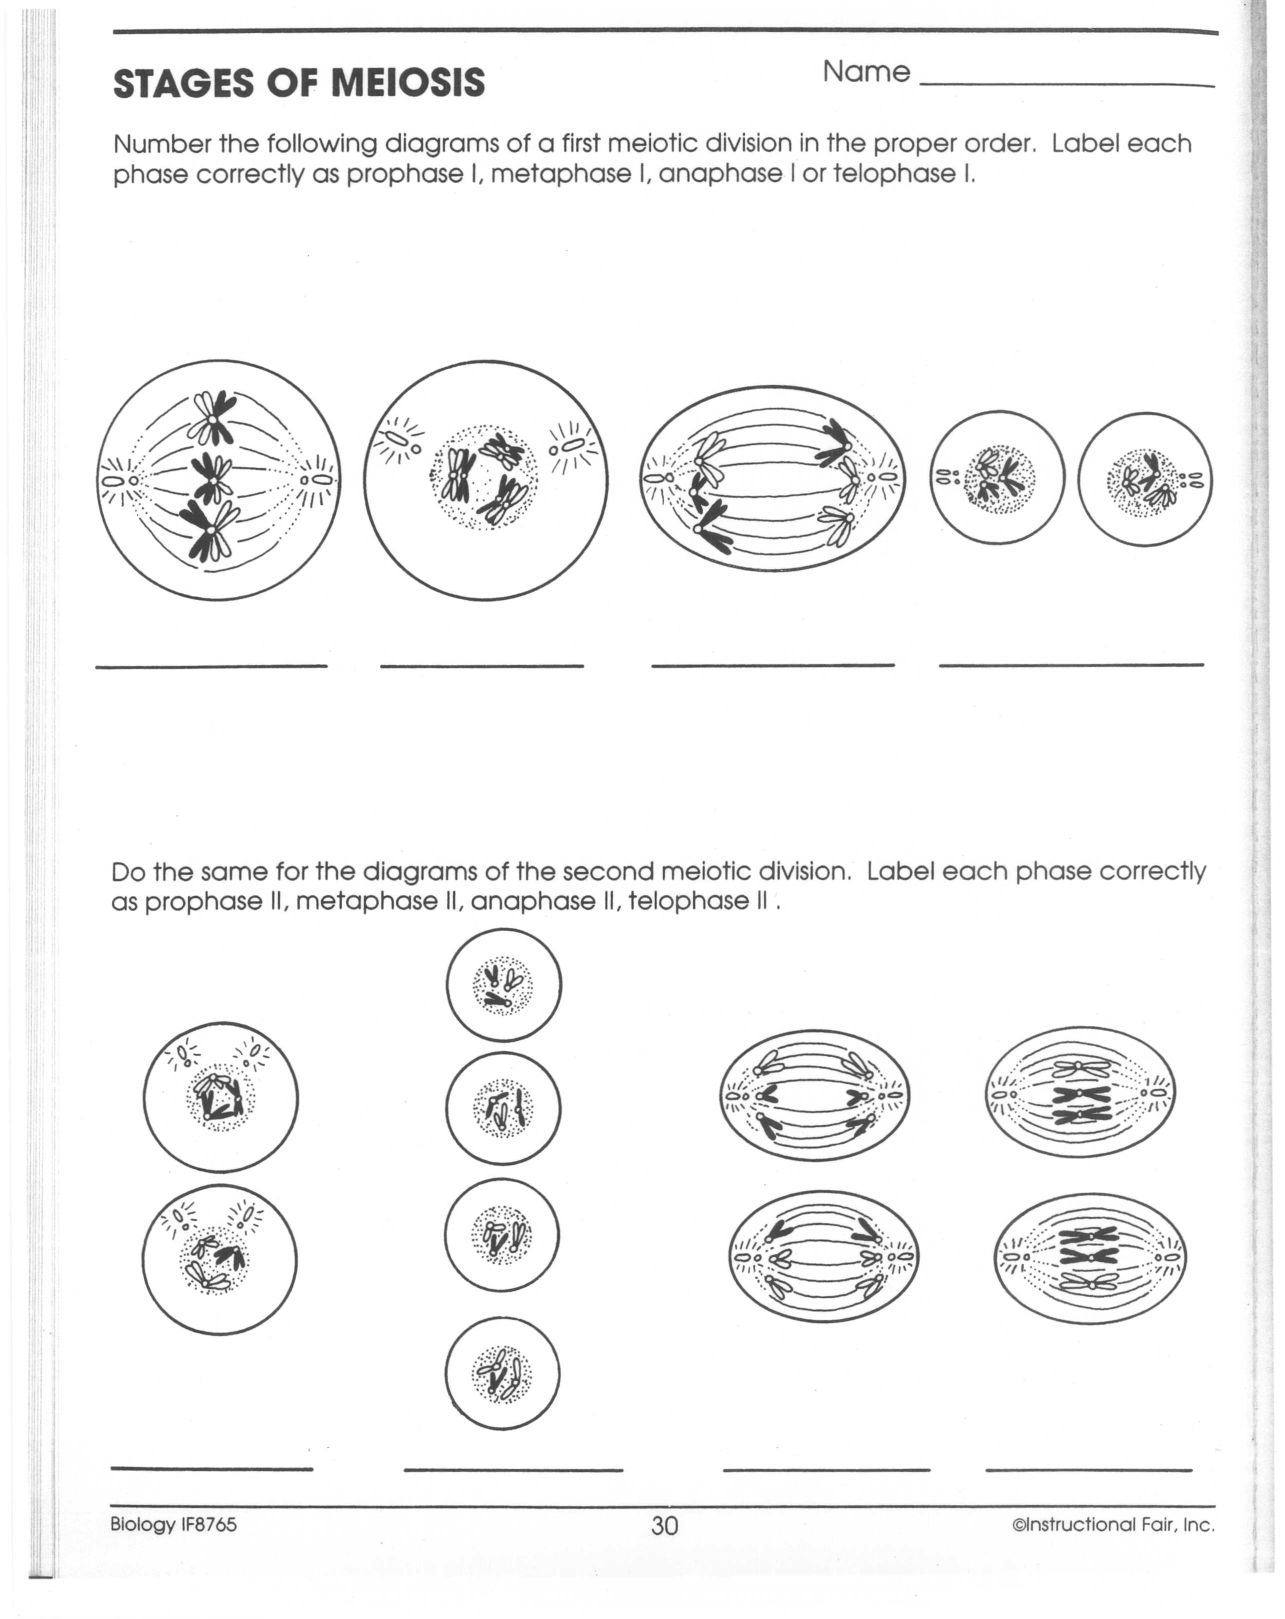 Comparing Mitosis To Meiosis Worksheet